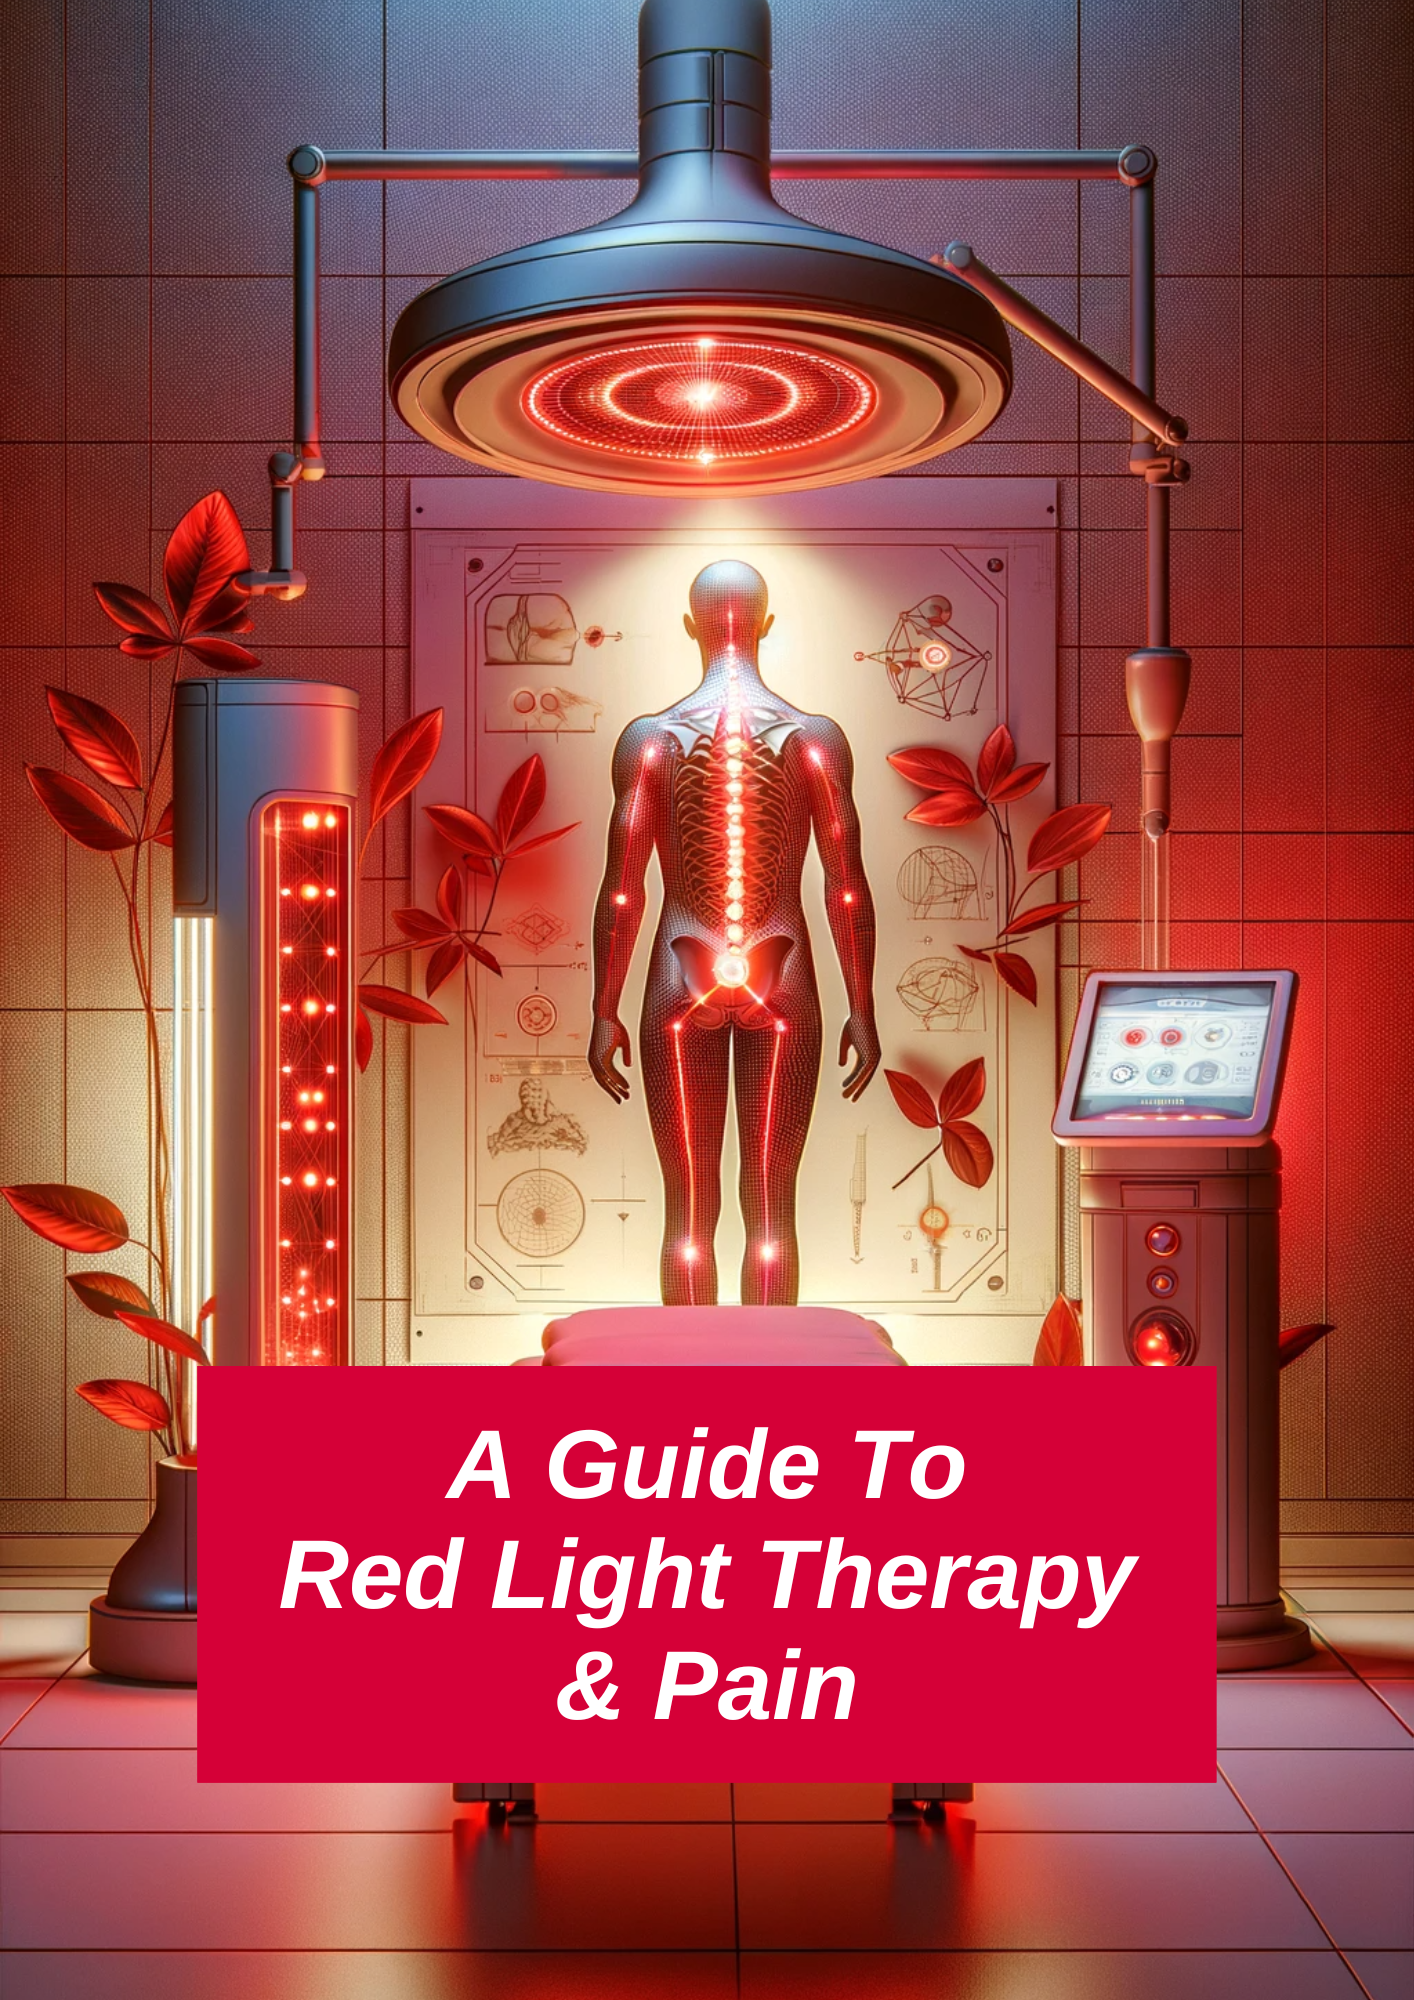 E-Book: A Guide To Red Light Therapy & Pain